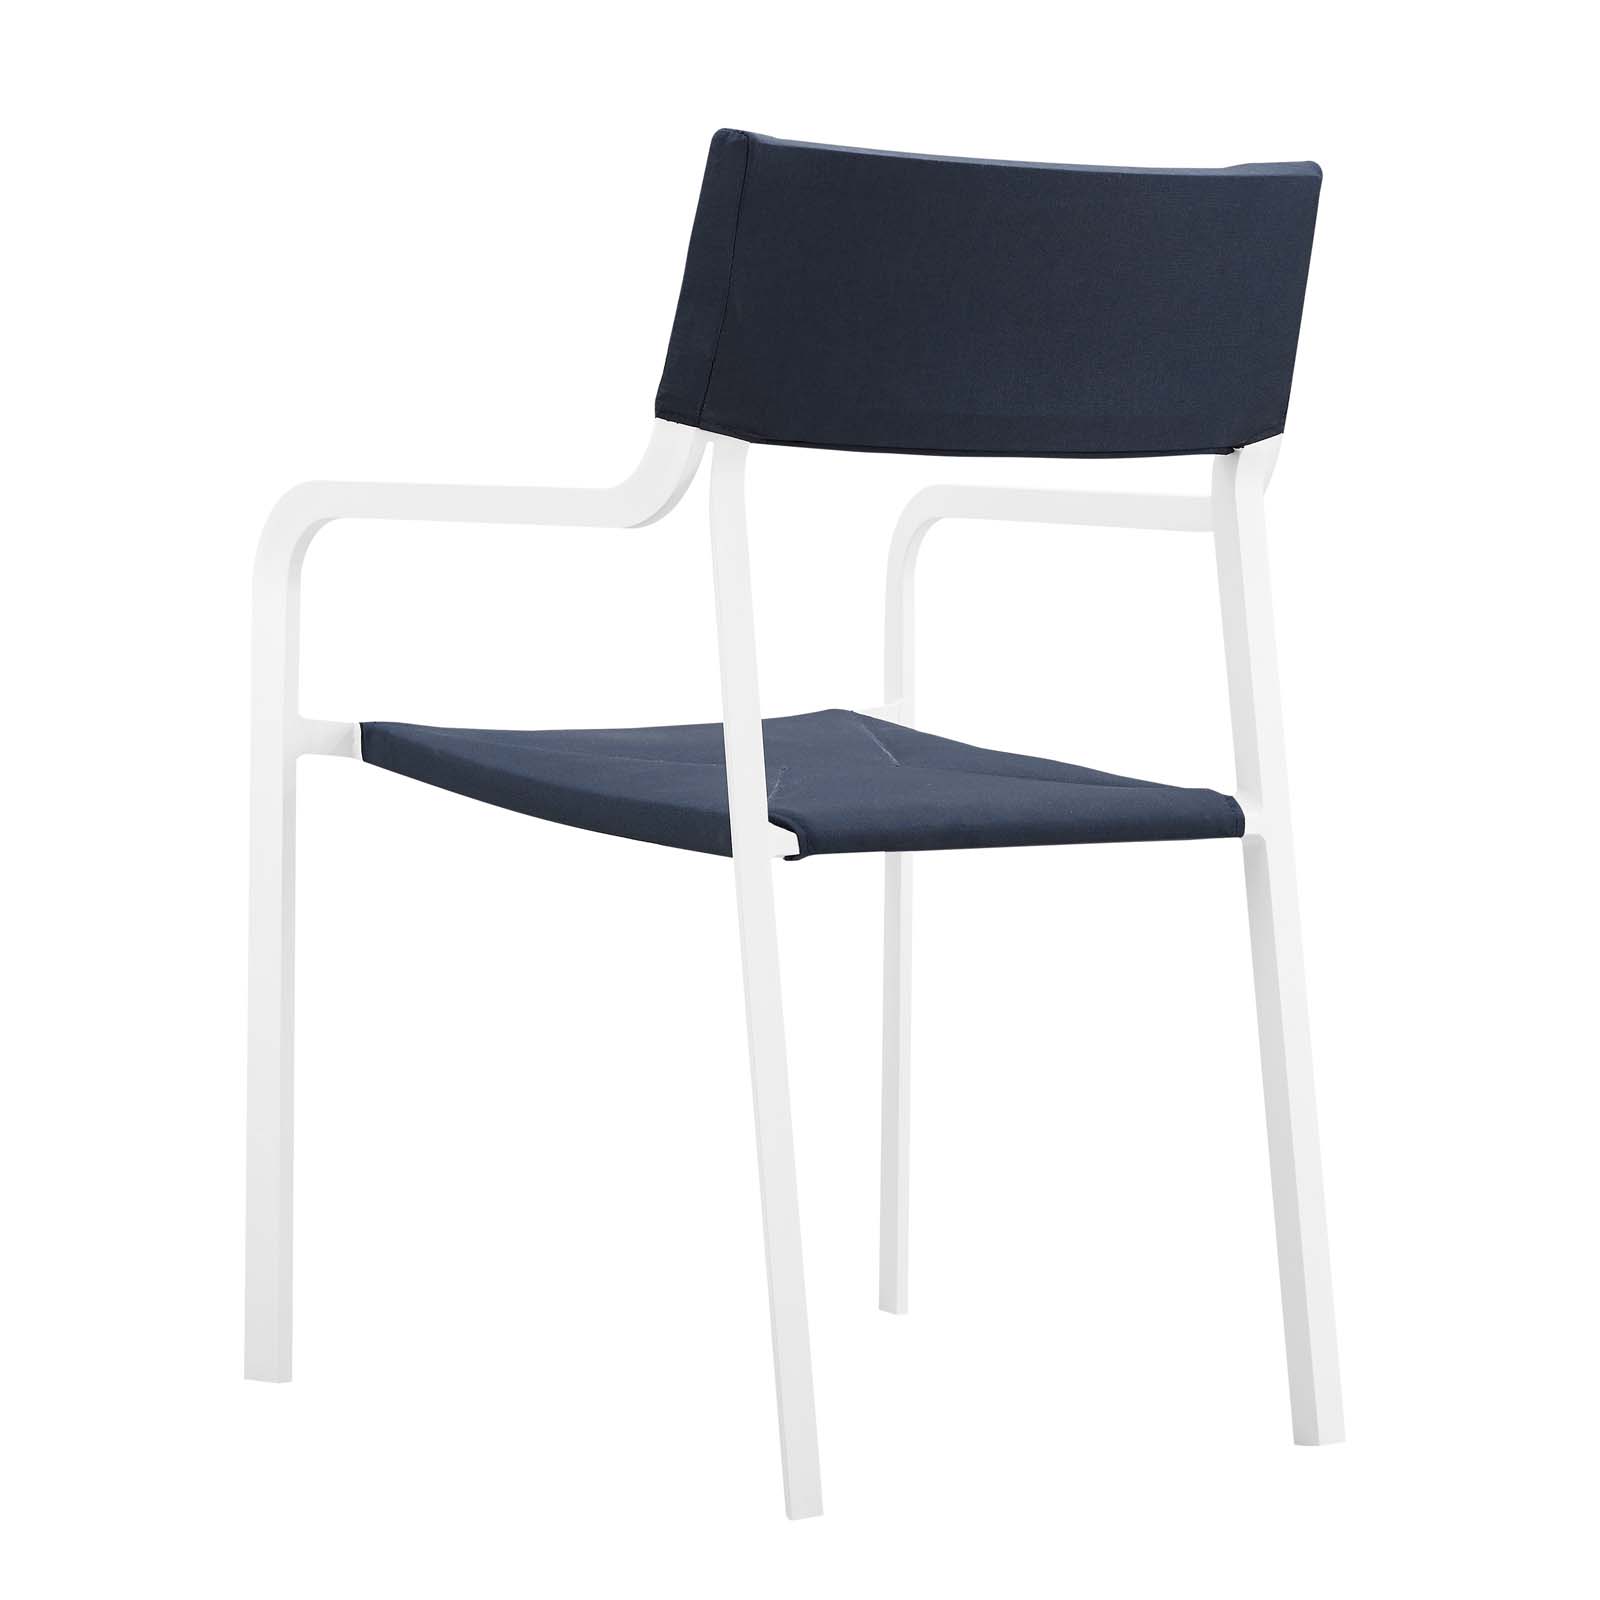 Contemporary Modern Urban Designer Outdoor Patio Balcony Garden Furniture Side Dining Armchair Chair, Fabric Aluminum, Navy Blue White - image 3 of 6